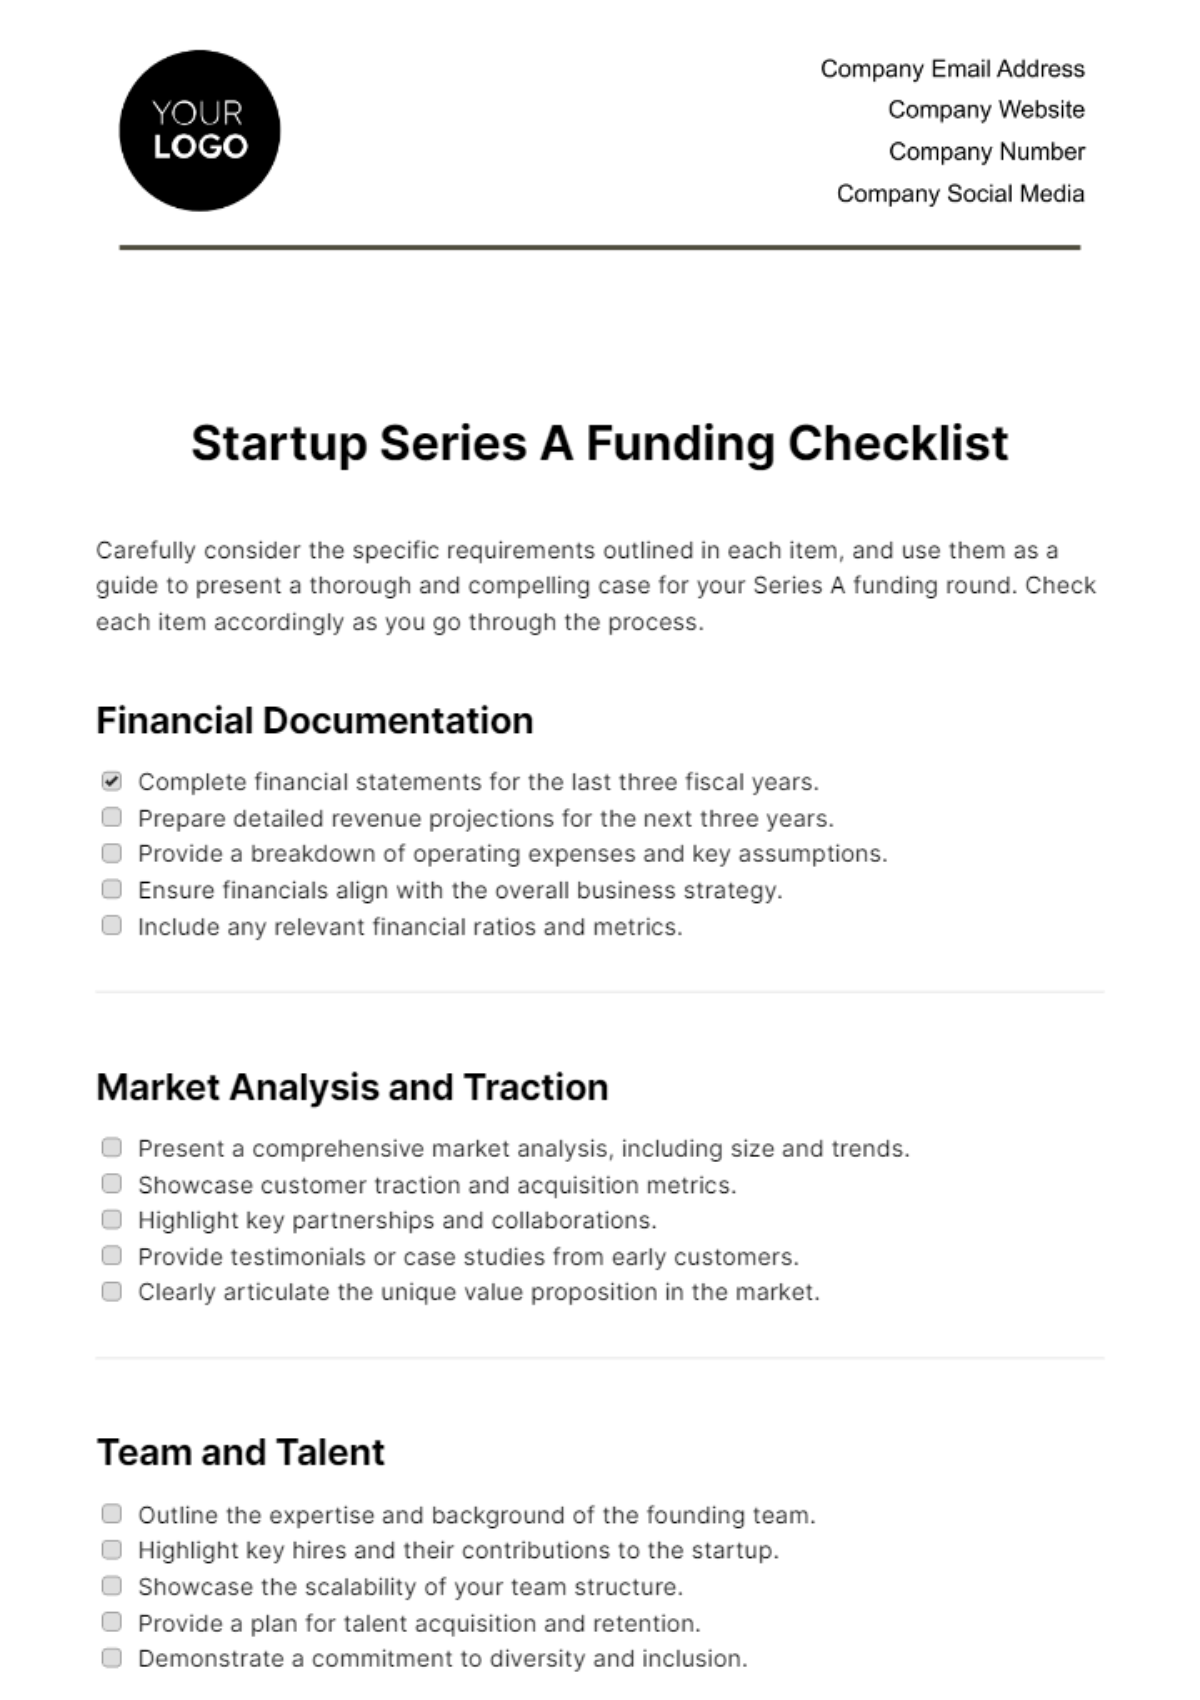 Free Startup Series A Funding Checklist Template